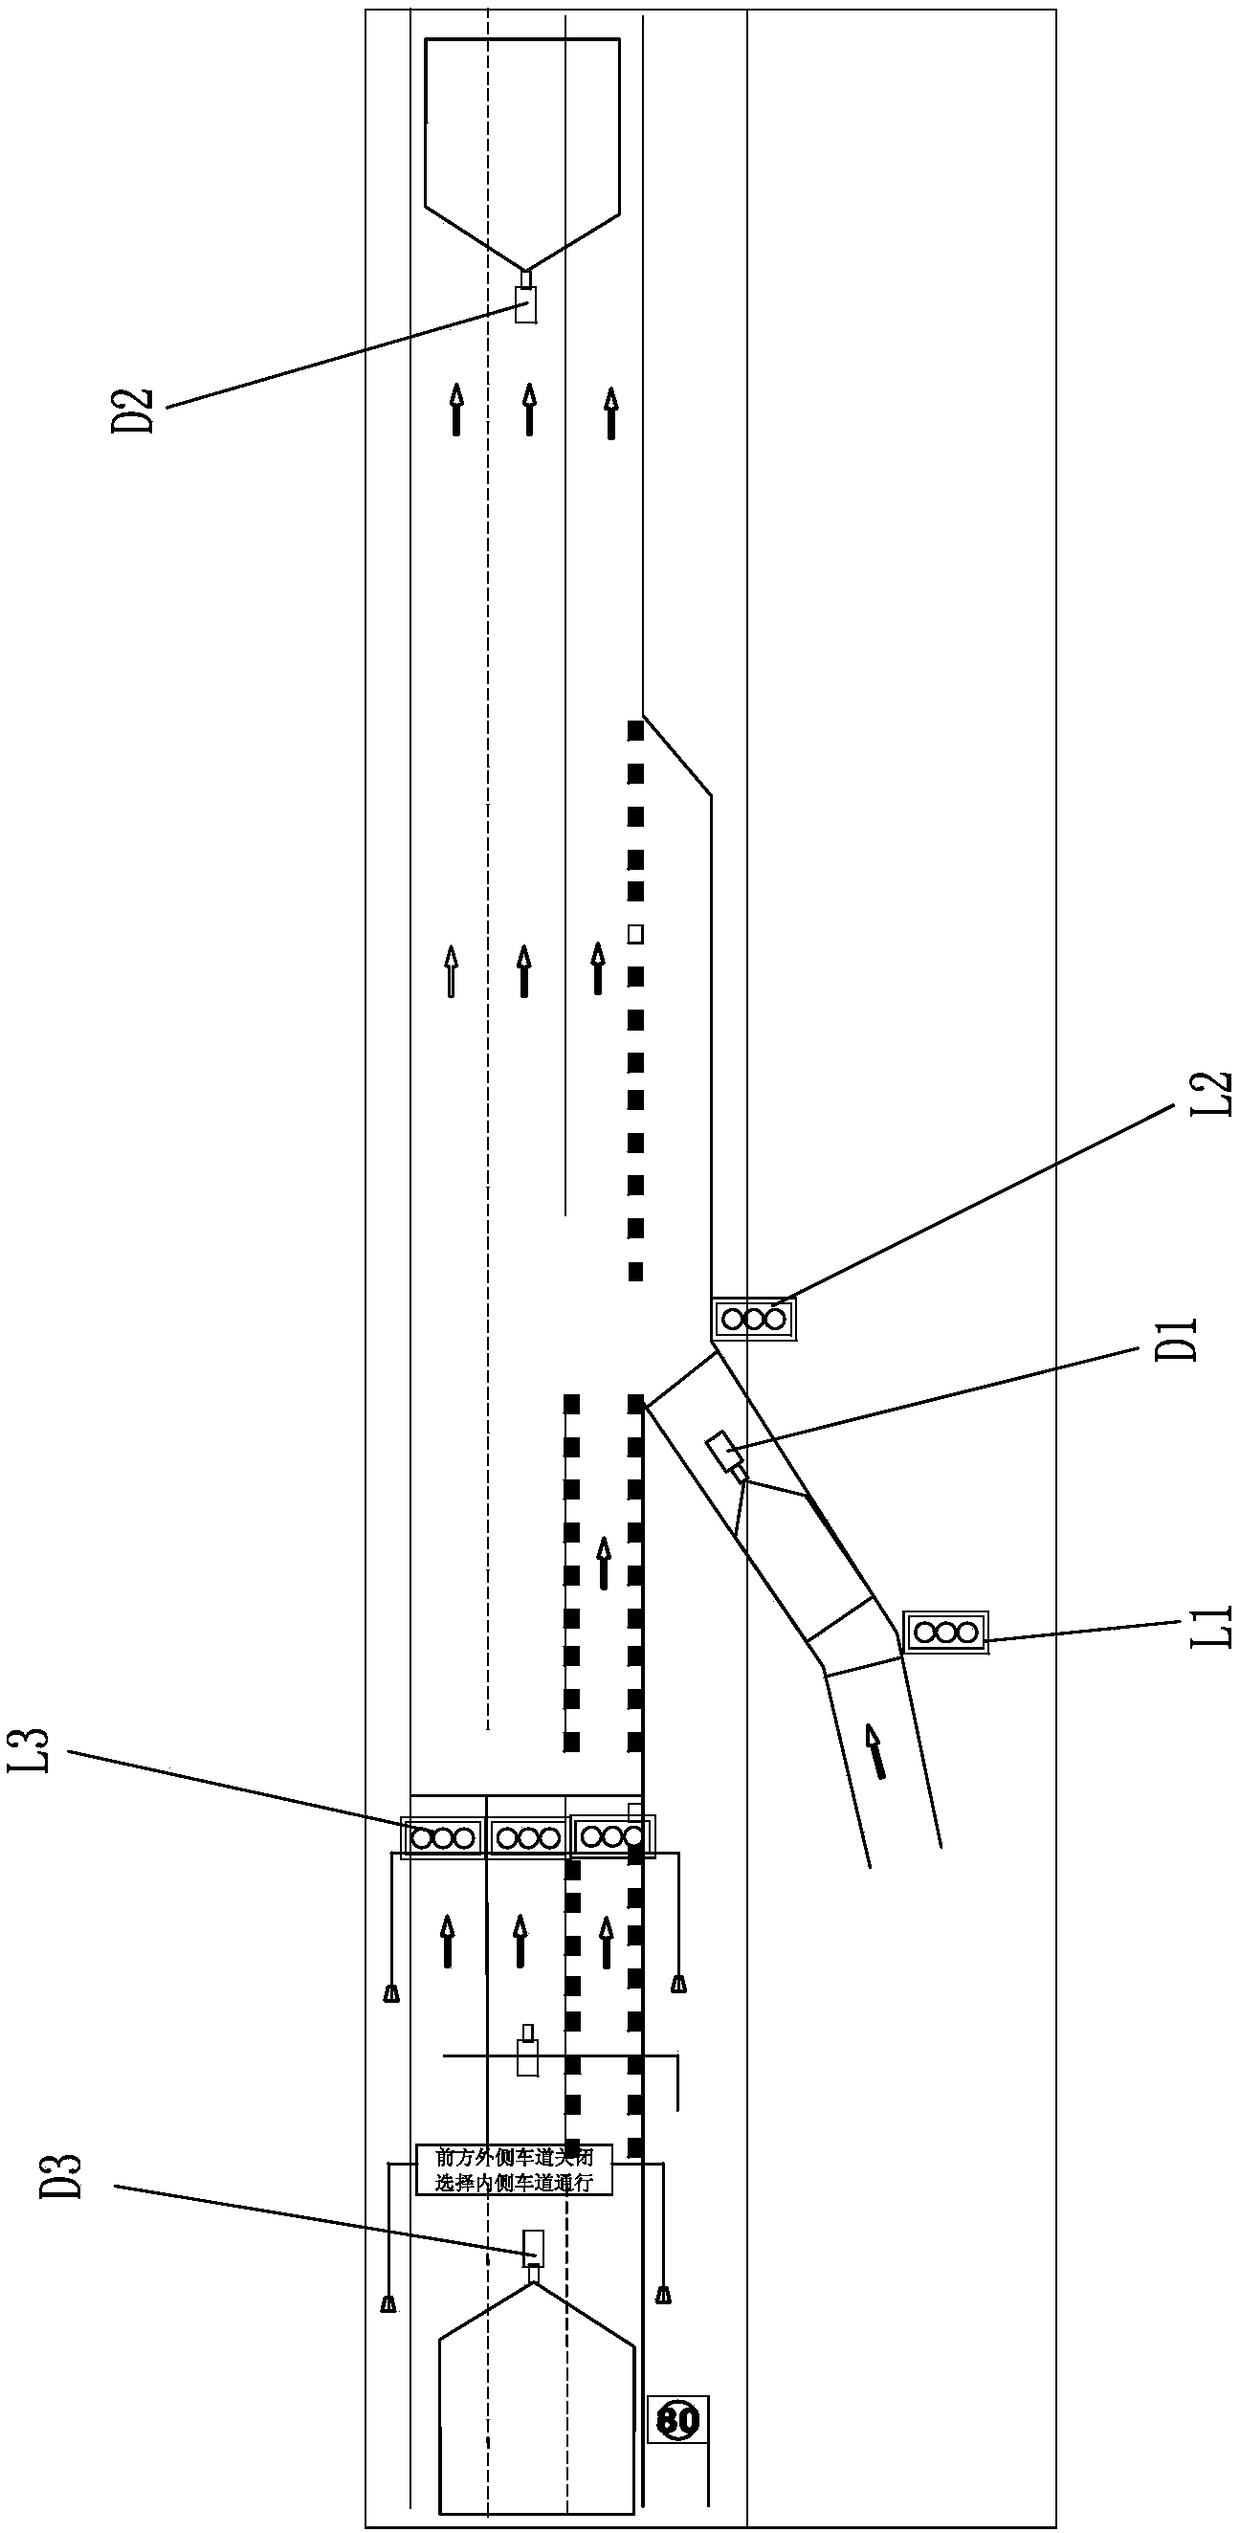 Cooperative control method and system for trunk line and ramp of city expressway